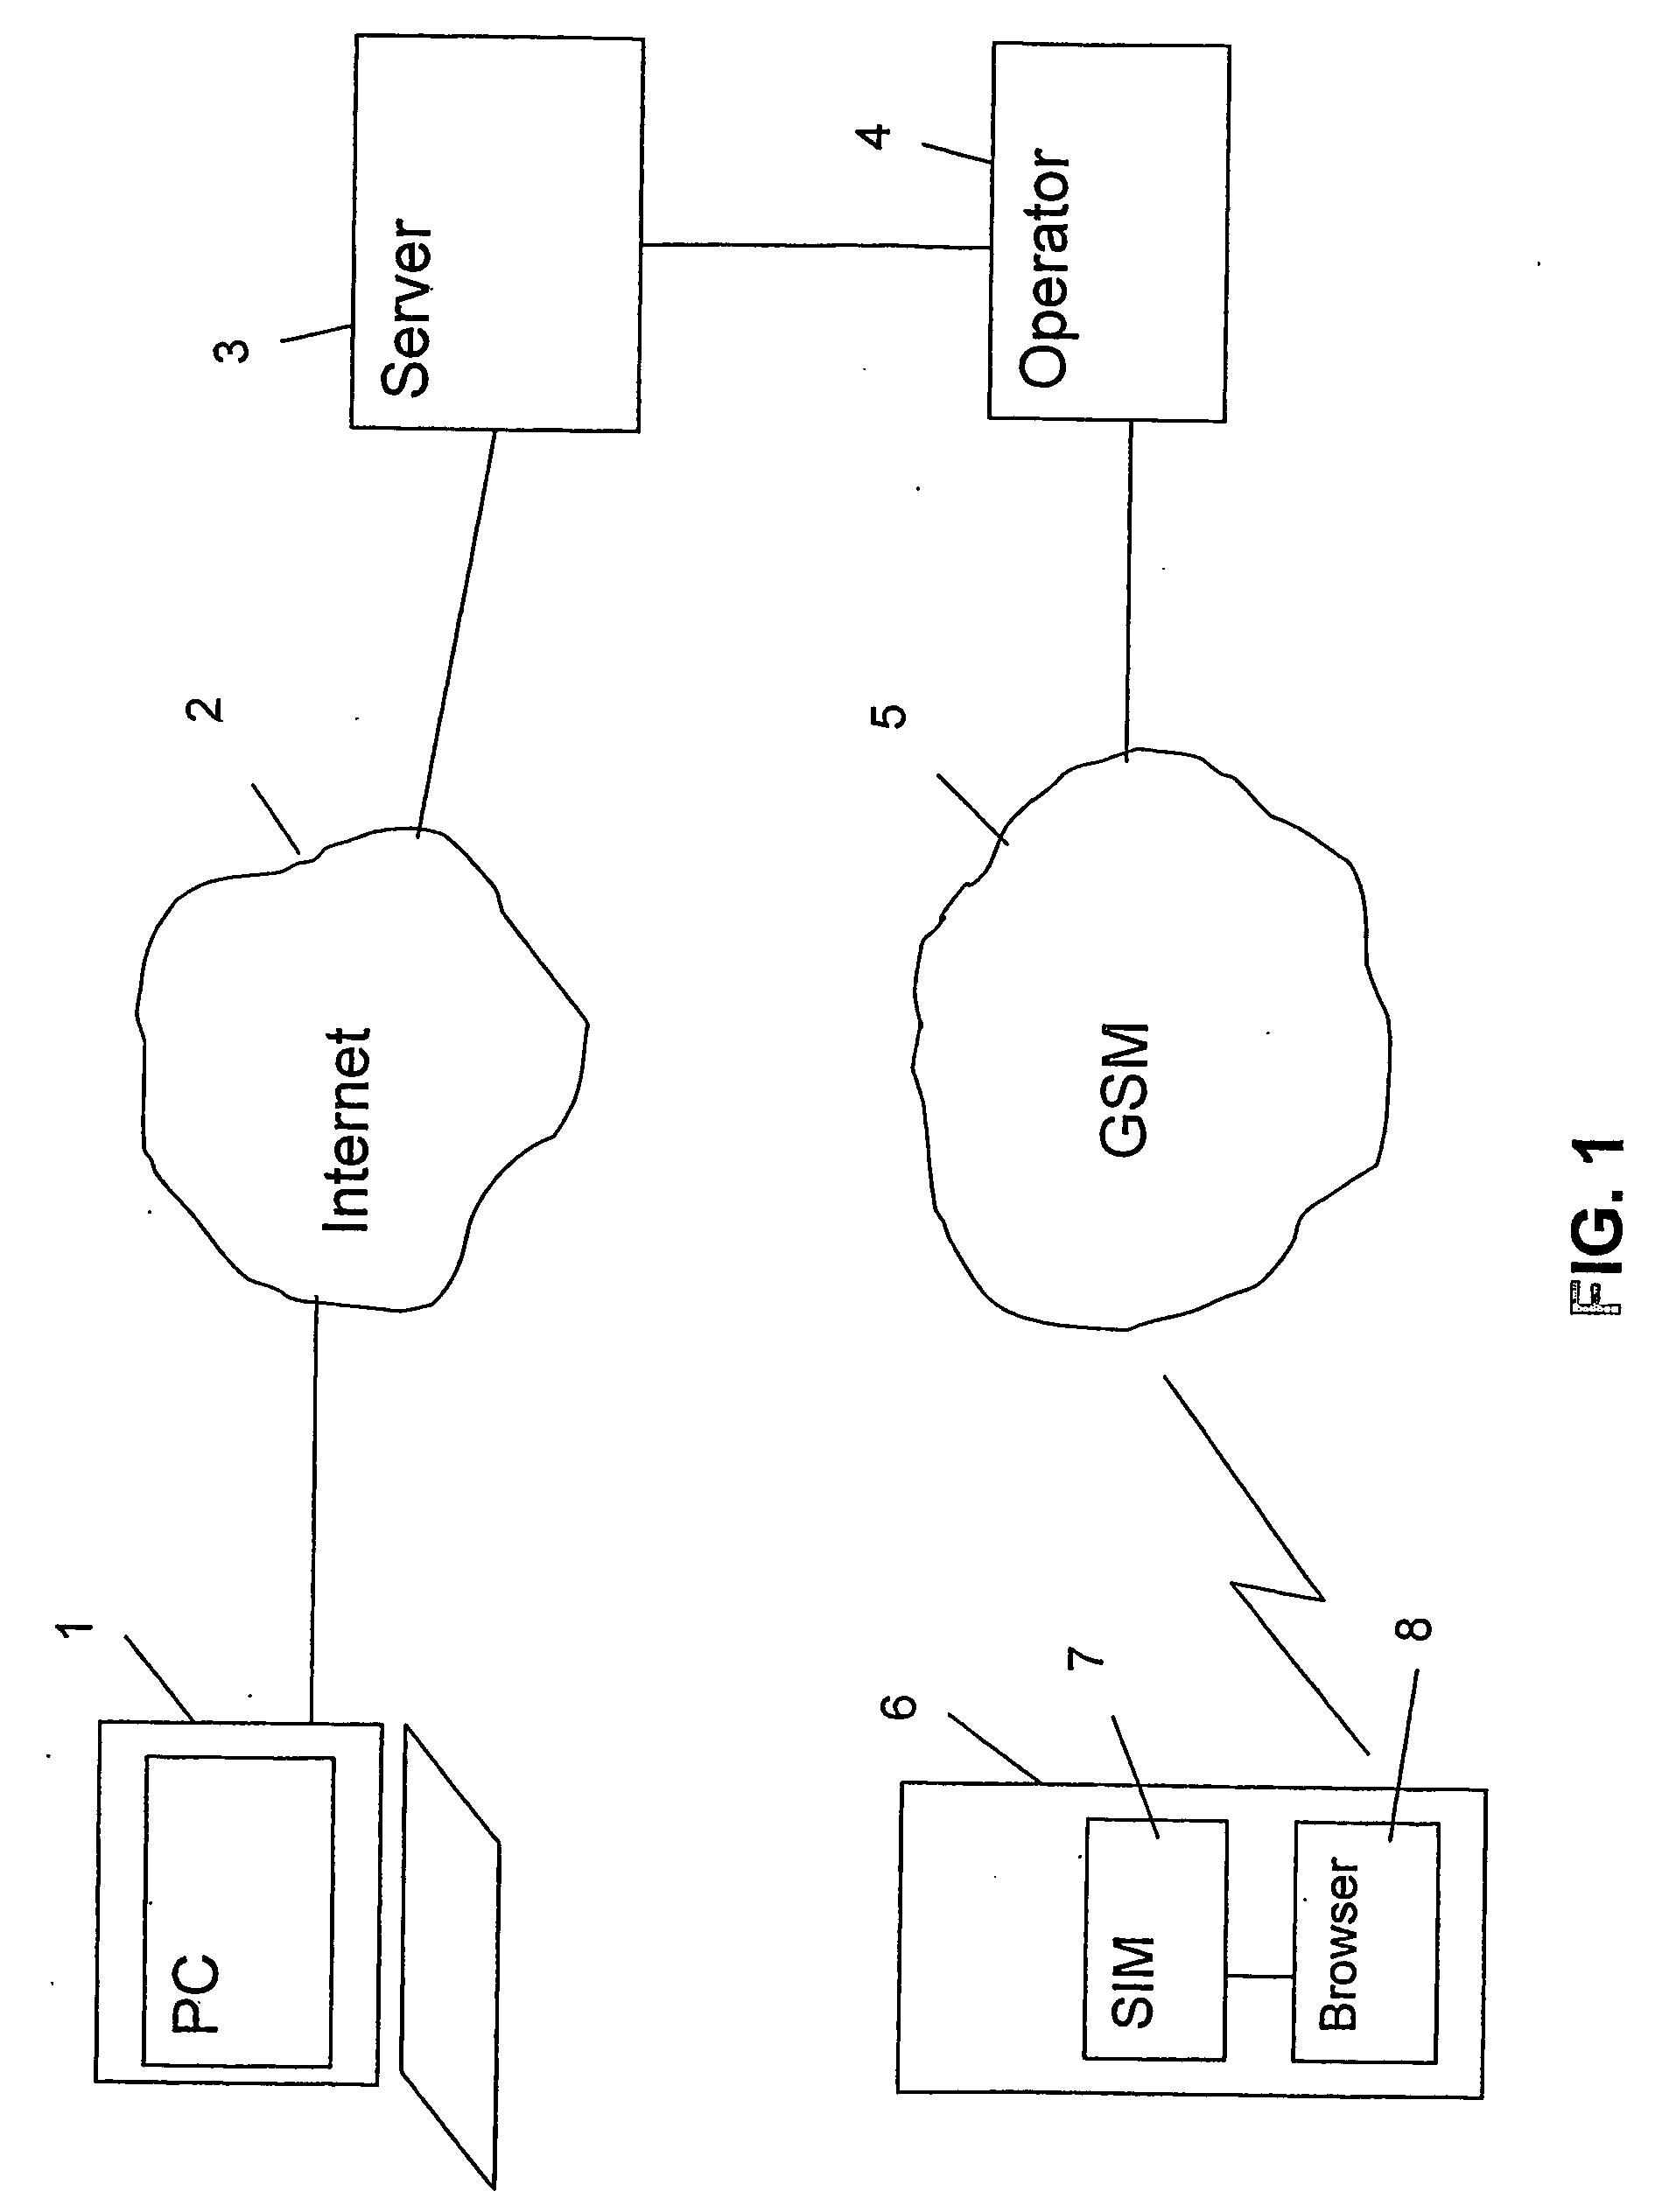 Method for secure downloading of applications